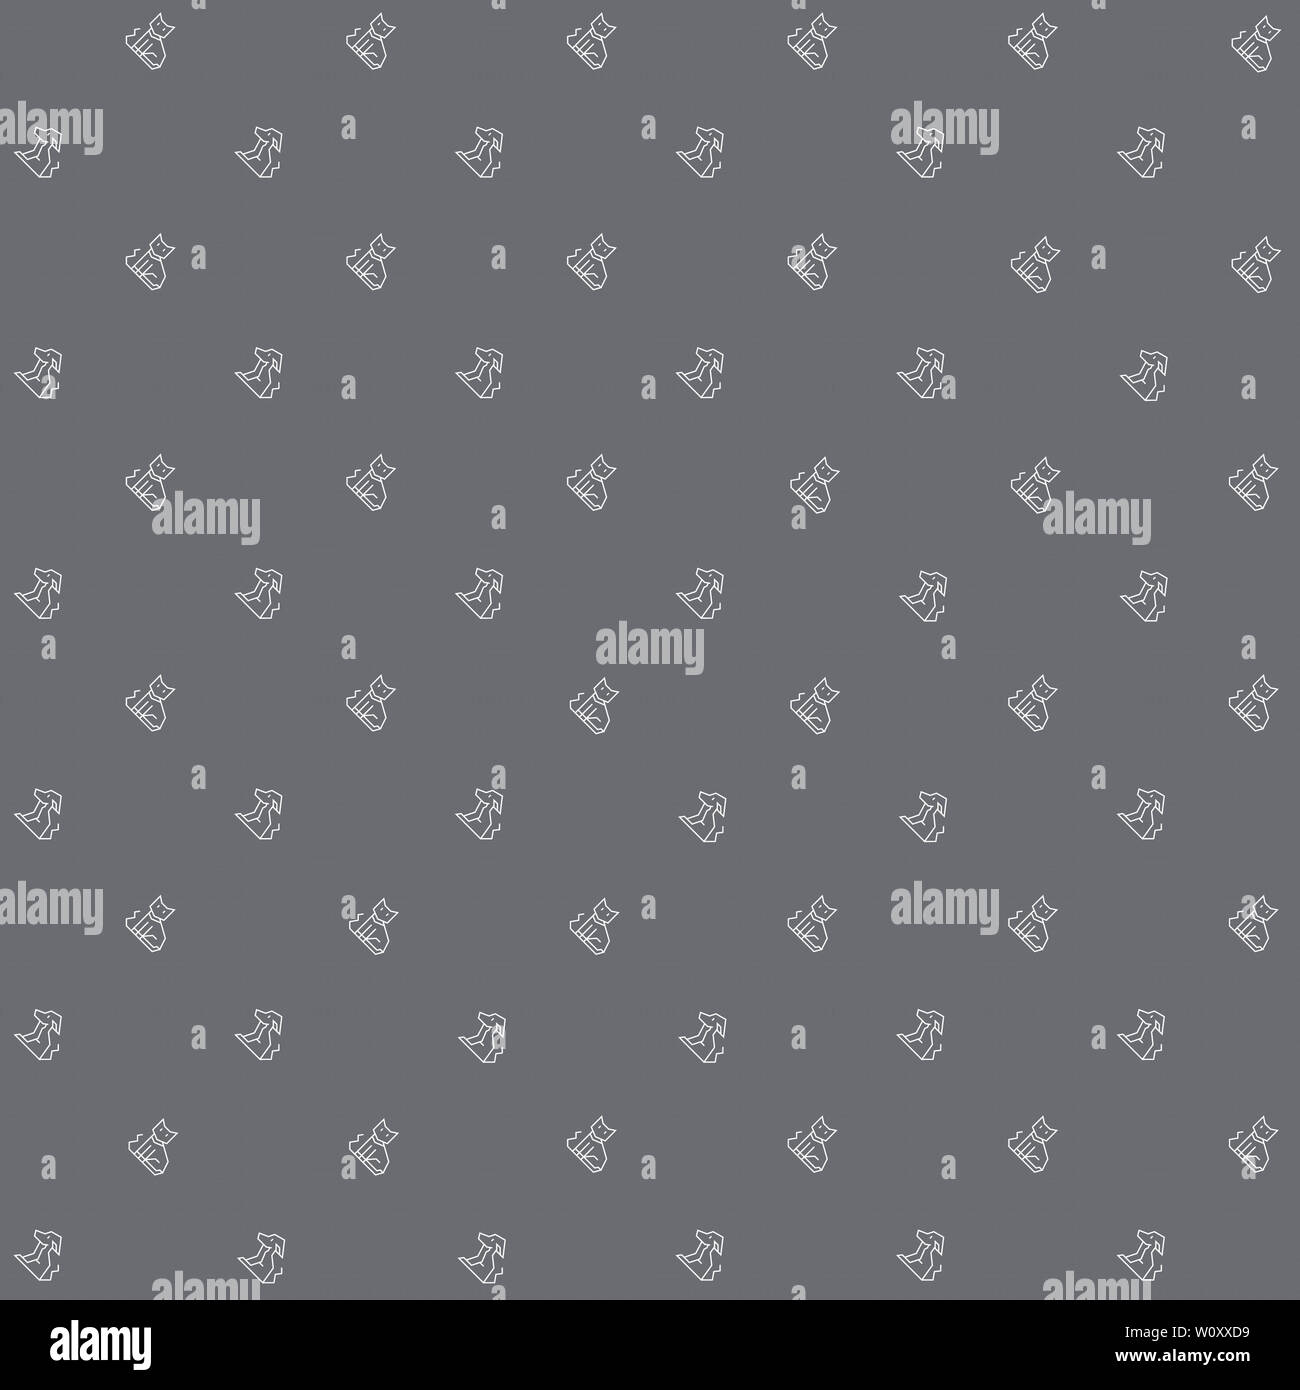 Cute Pet Icon Patterns for Background Design Layout Images Stock Photo